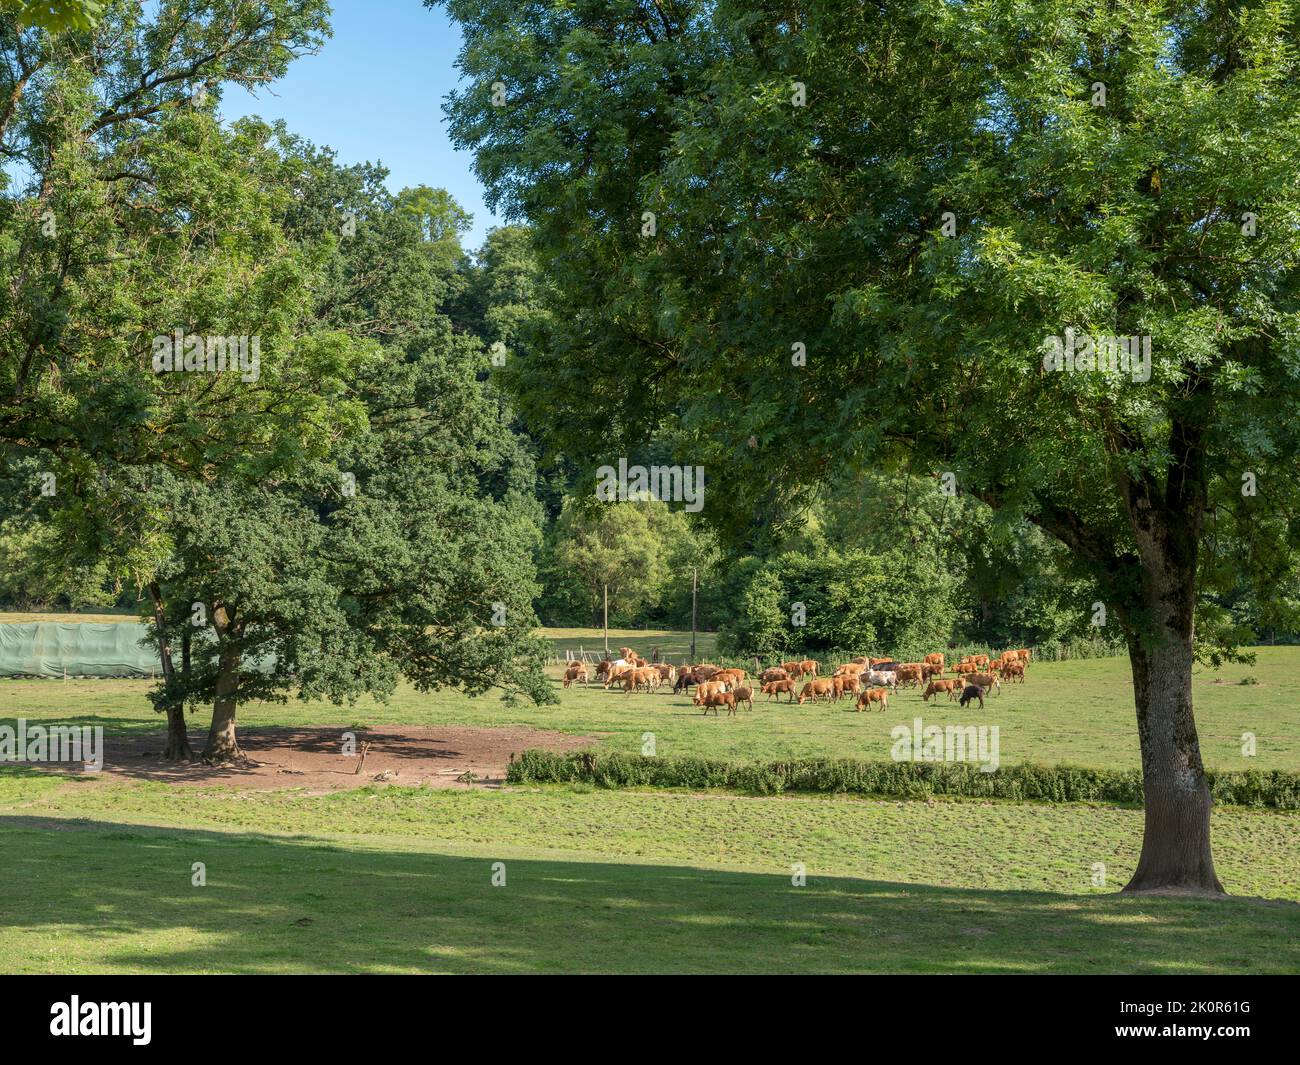 cows in valley near river Our in country of luxemburg Stock Photo